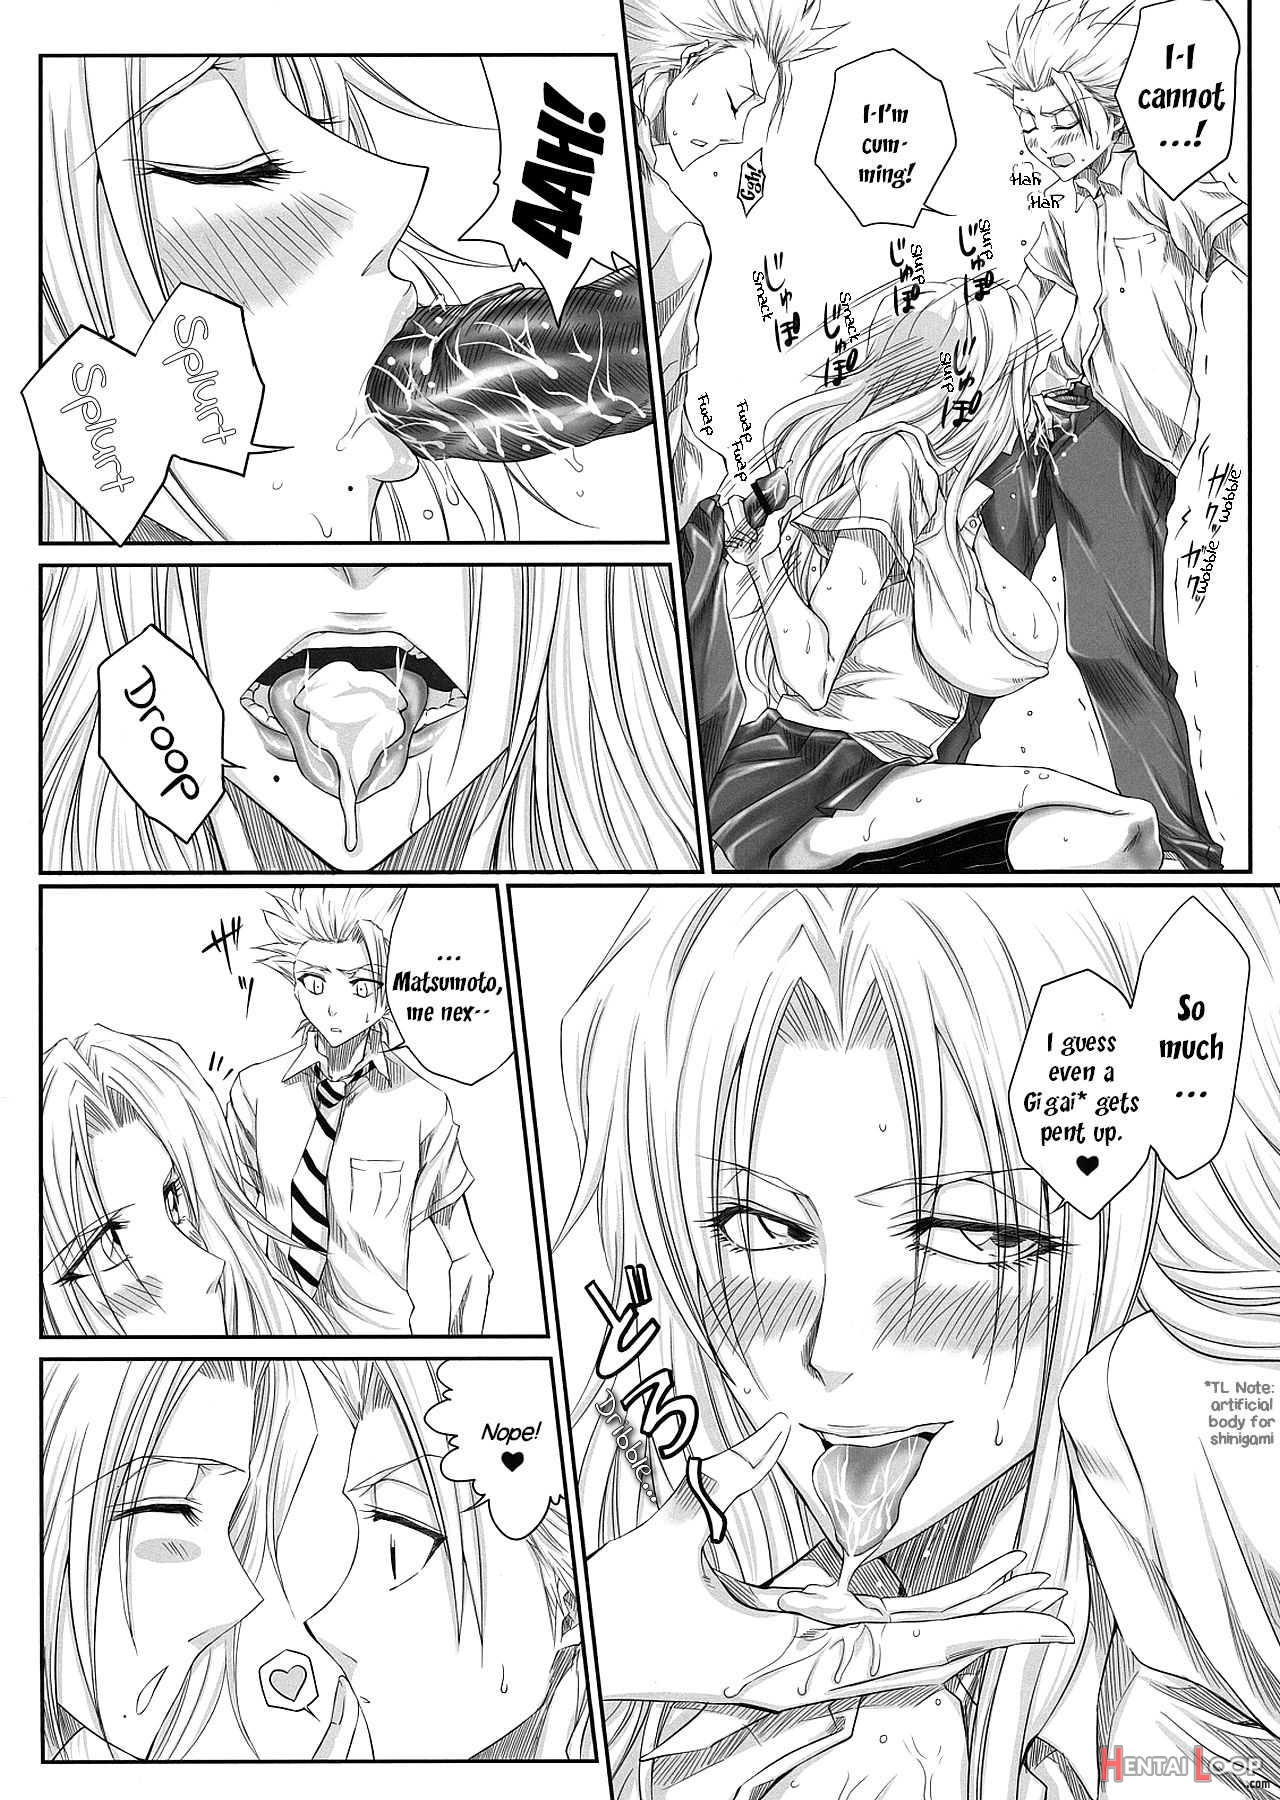 Ruler page 10